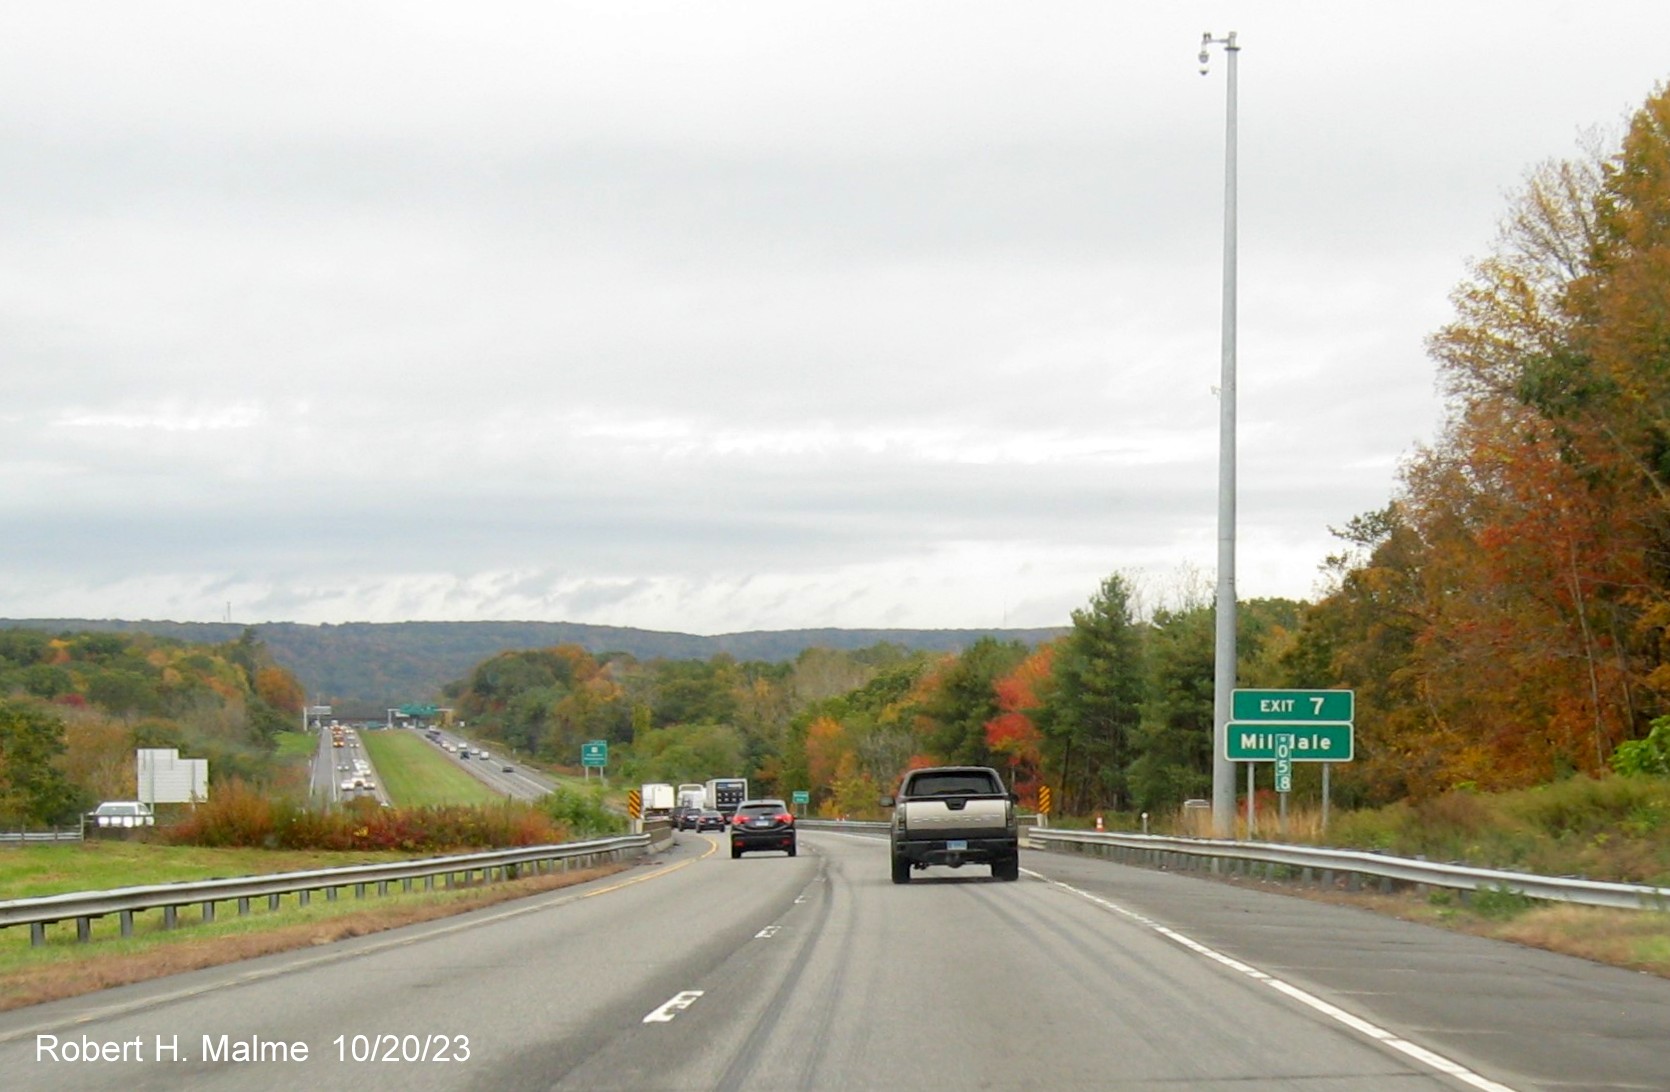 Image of new auxiliary sign for the CT 10 exit with new mile marker with 3 digit number in front
         on I-691 West in Cheshire, October 2023